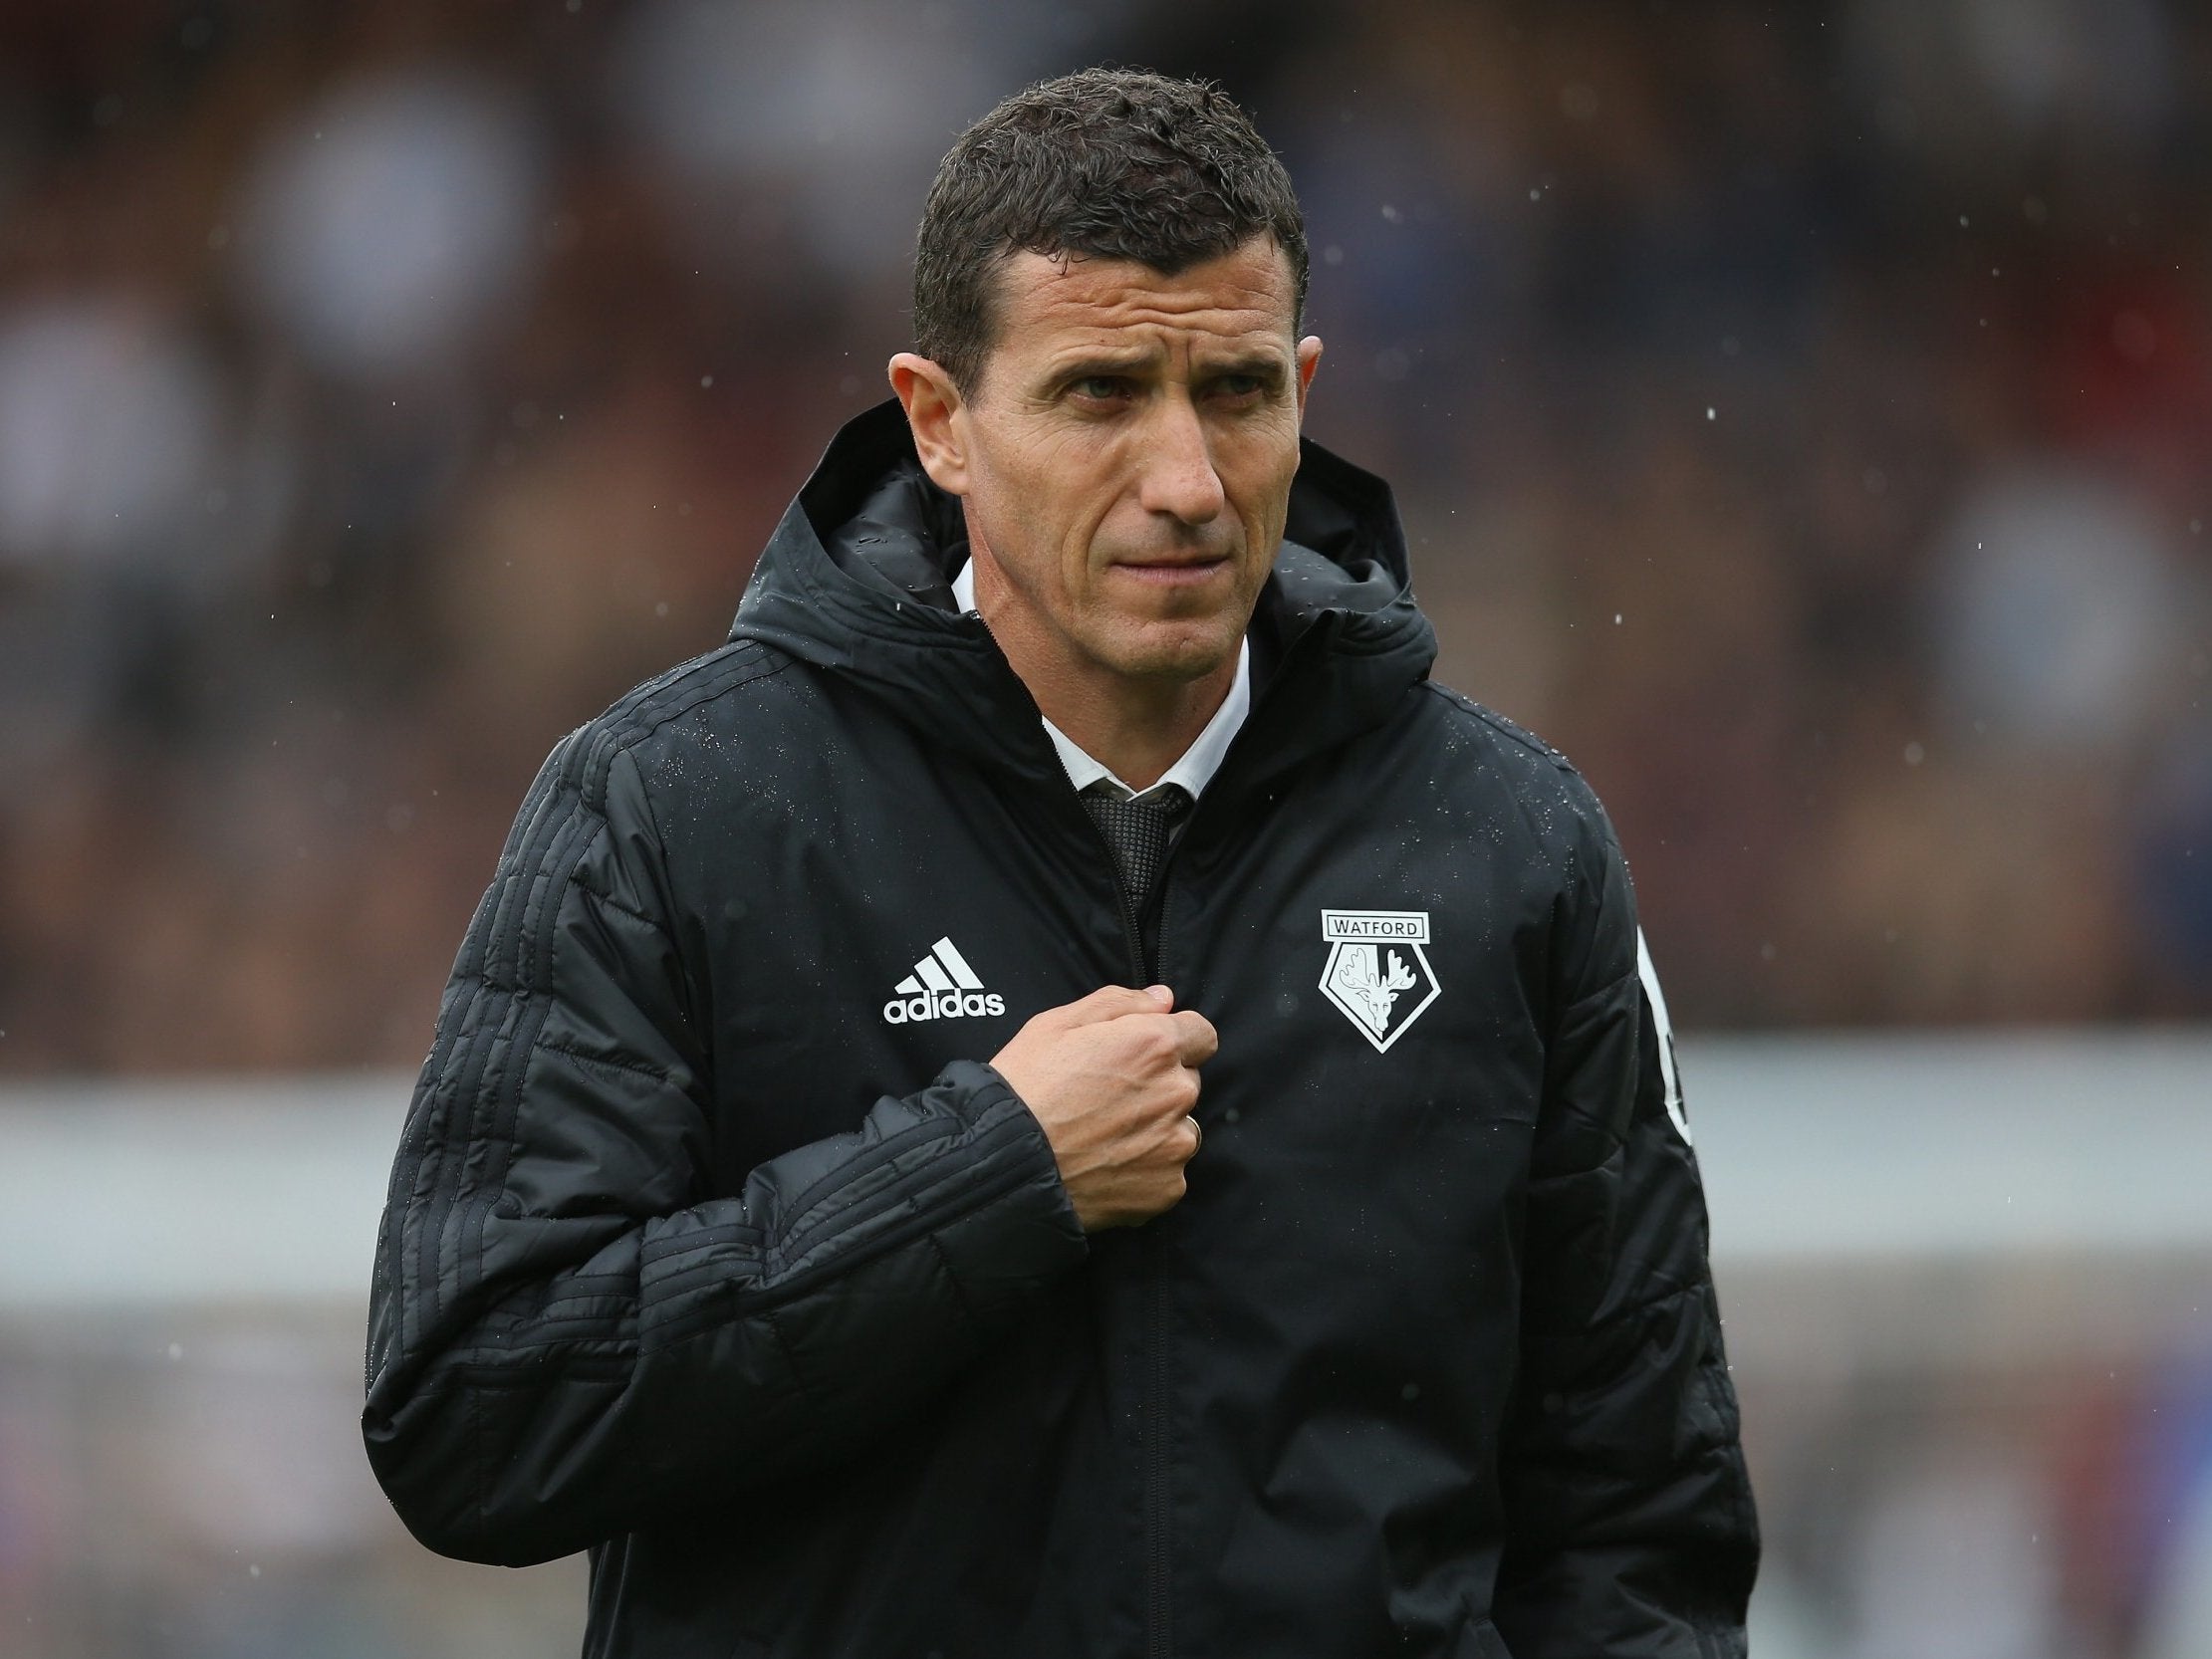 Javi Gracia in contract talks with Watford as he looks to buck the trend and lay down roots at Vicarage Road